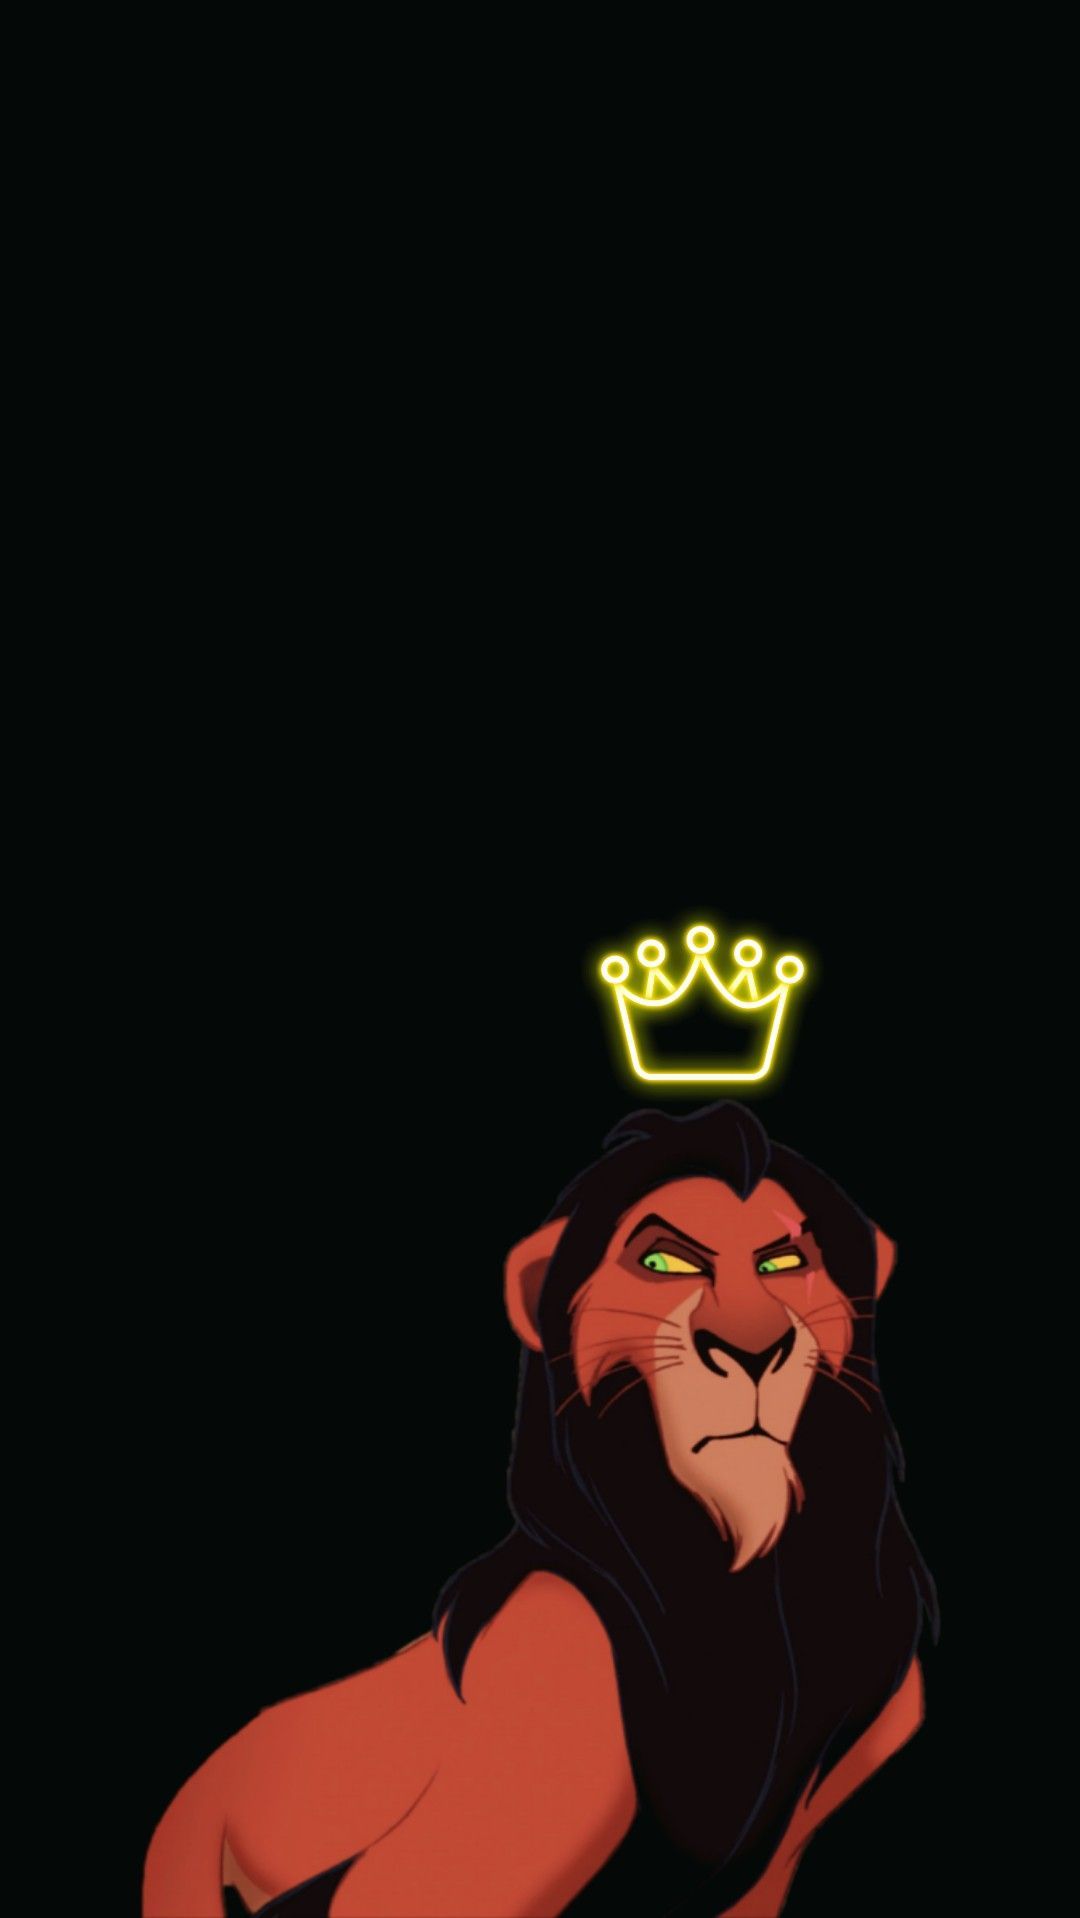 The lion is wearing a crown and sitting on his back - The Lion King, lion